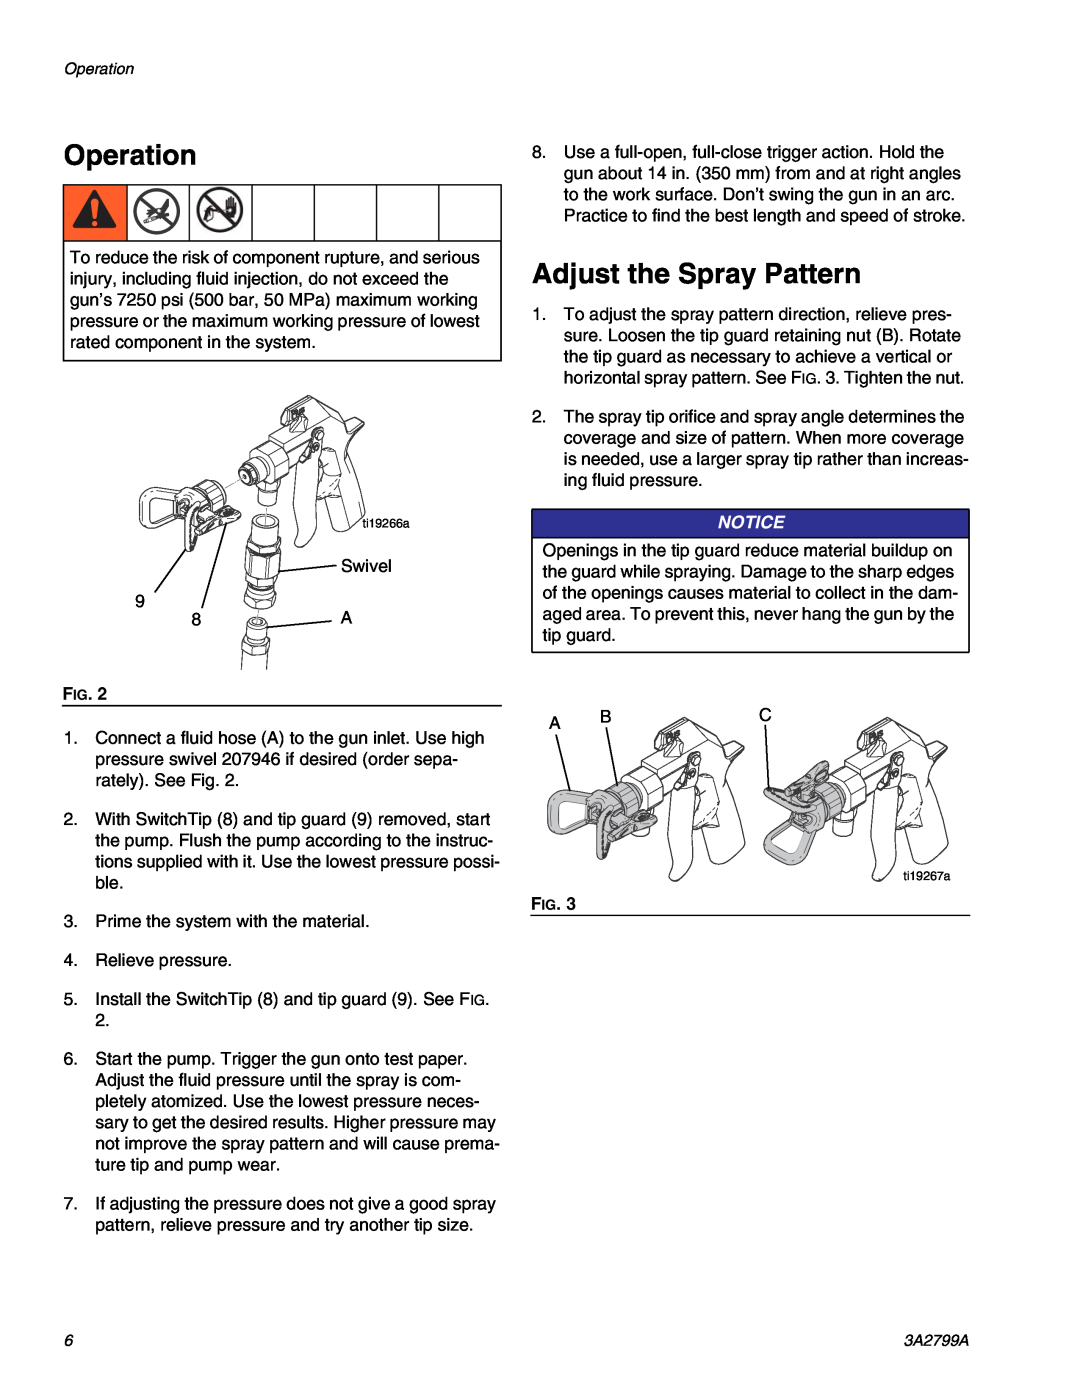 Graco Series A, 262854 important safety instructions Operation, Adjust the Spray Pattern 